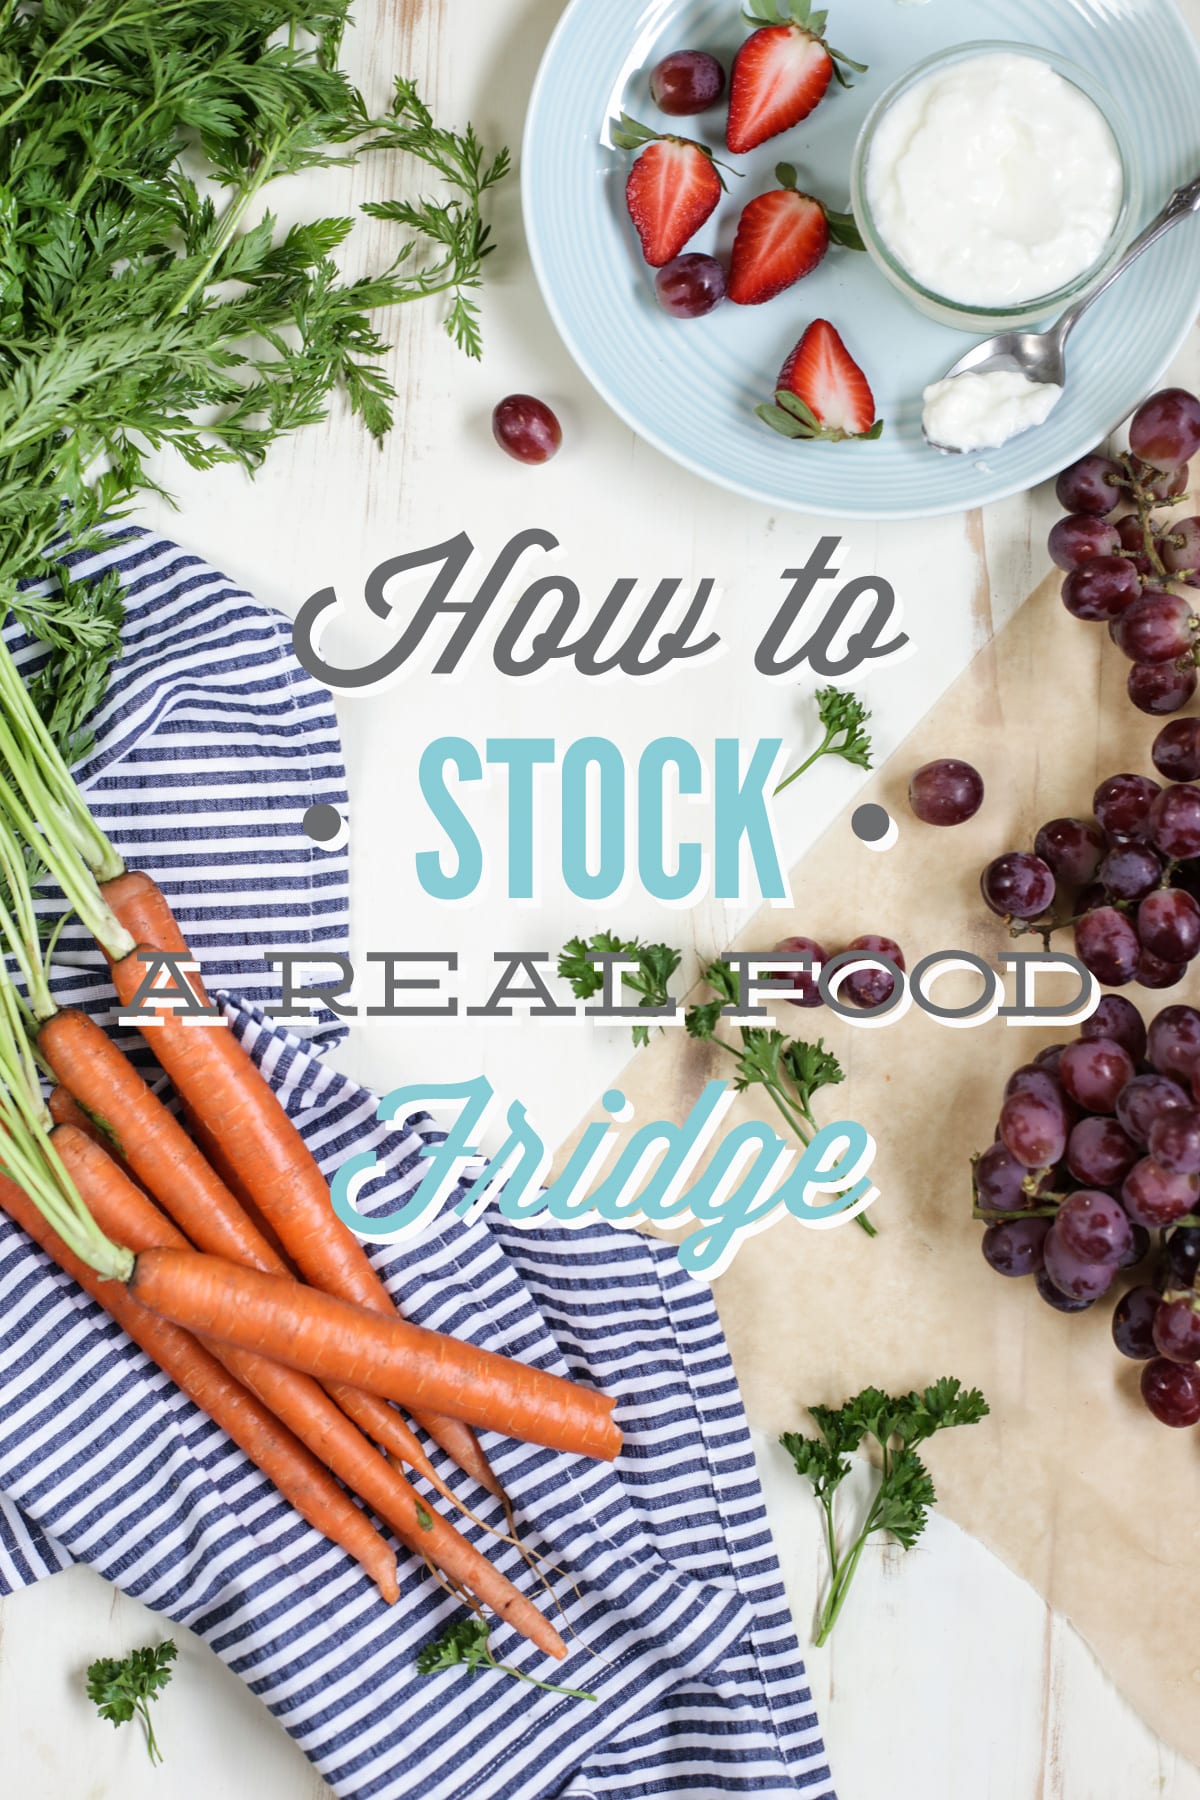 How to Stock a Real Food Fridge